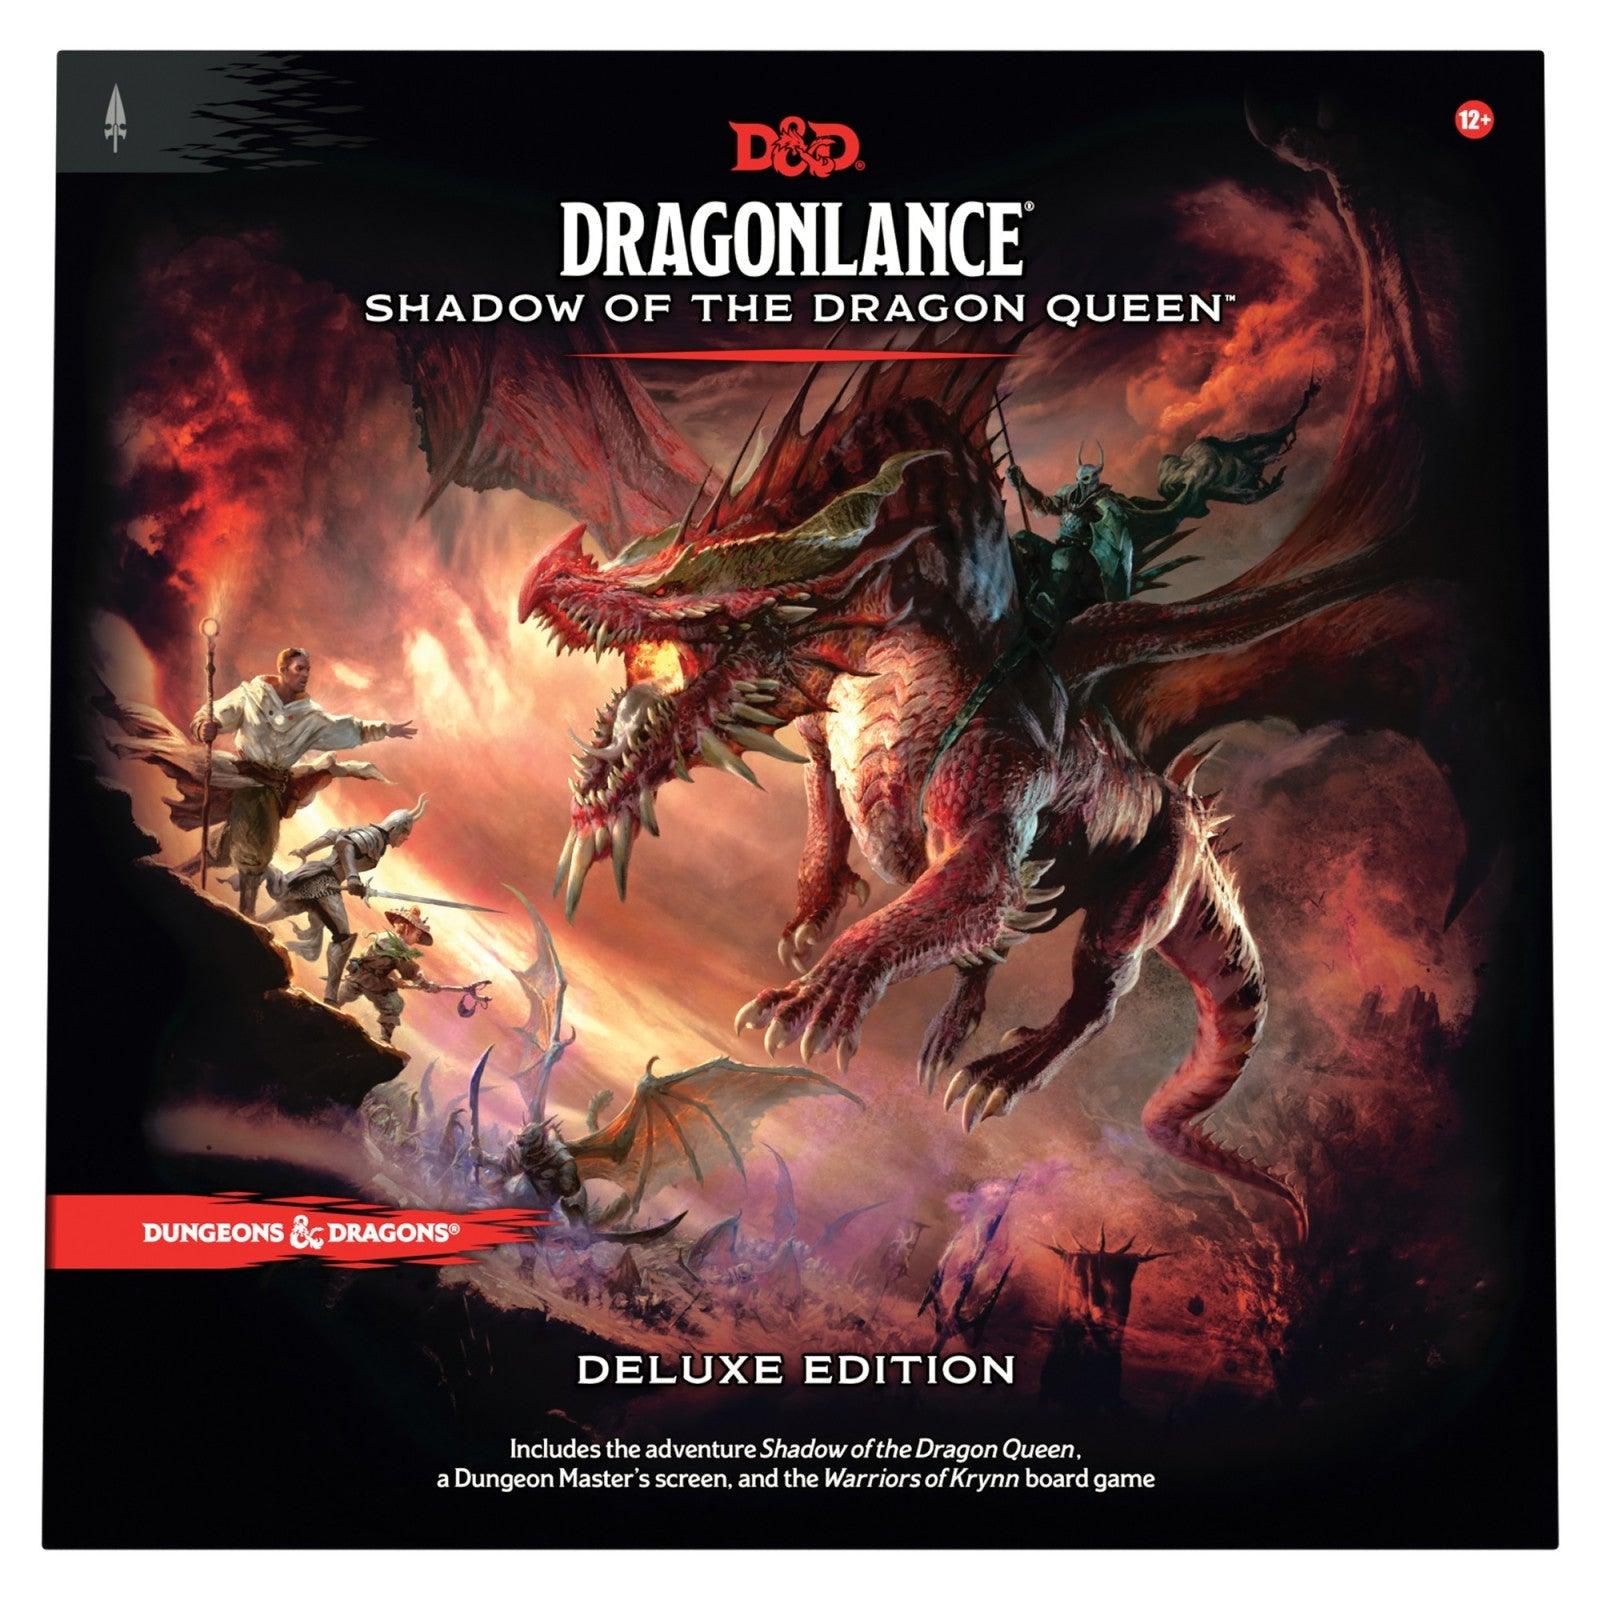 VR-101550 D&D Dungeons & Dragons Dragonlance Shadow of the Dragon Queen Deluxe Edition - Wizards of the Coast - Titan Pop Culture